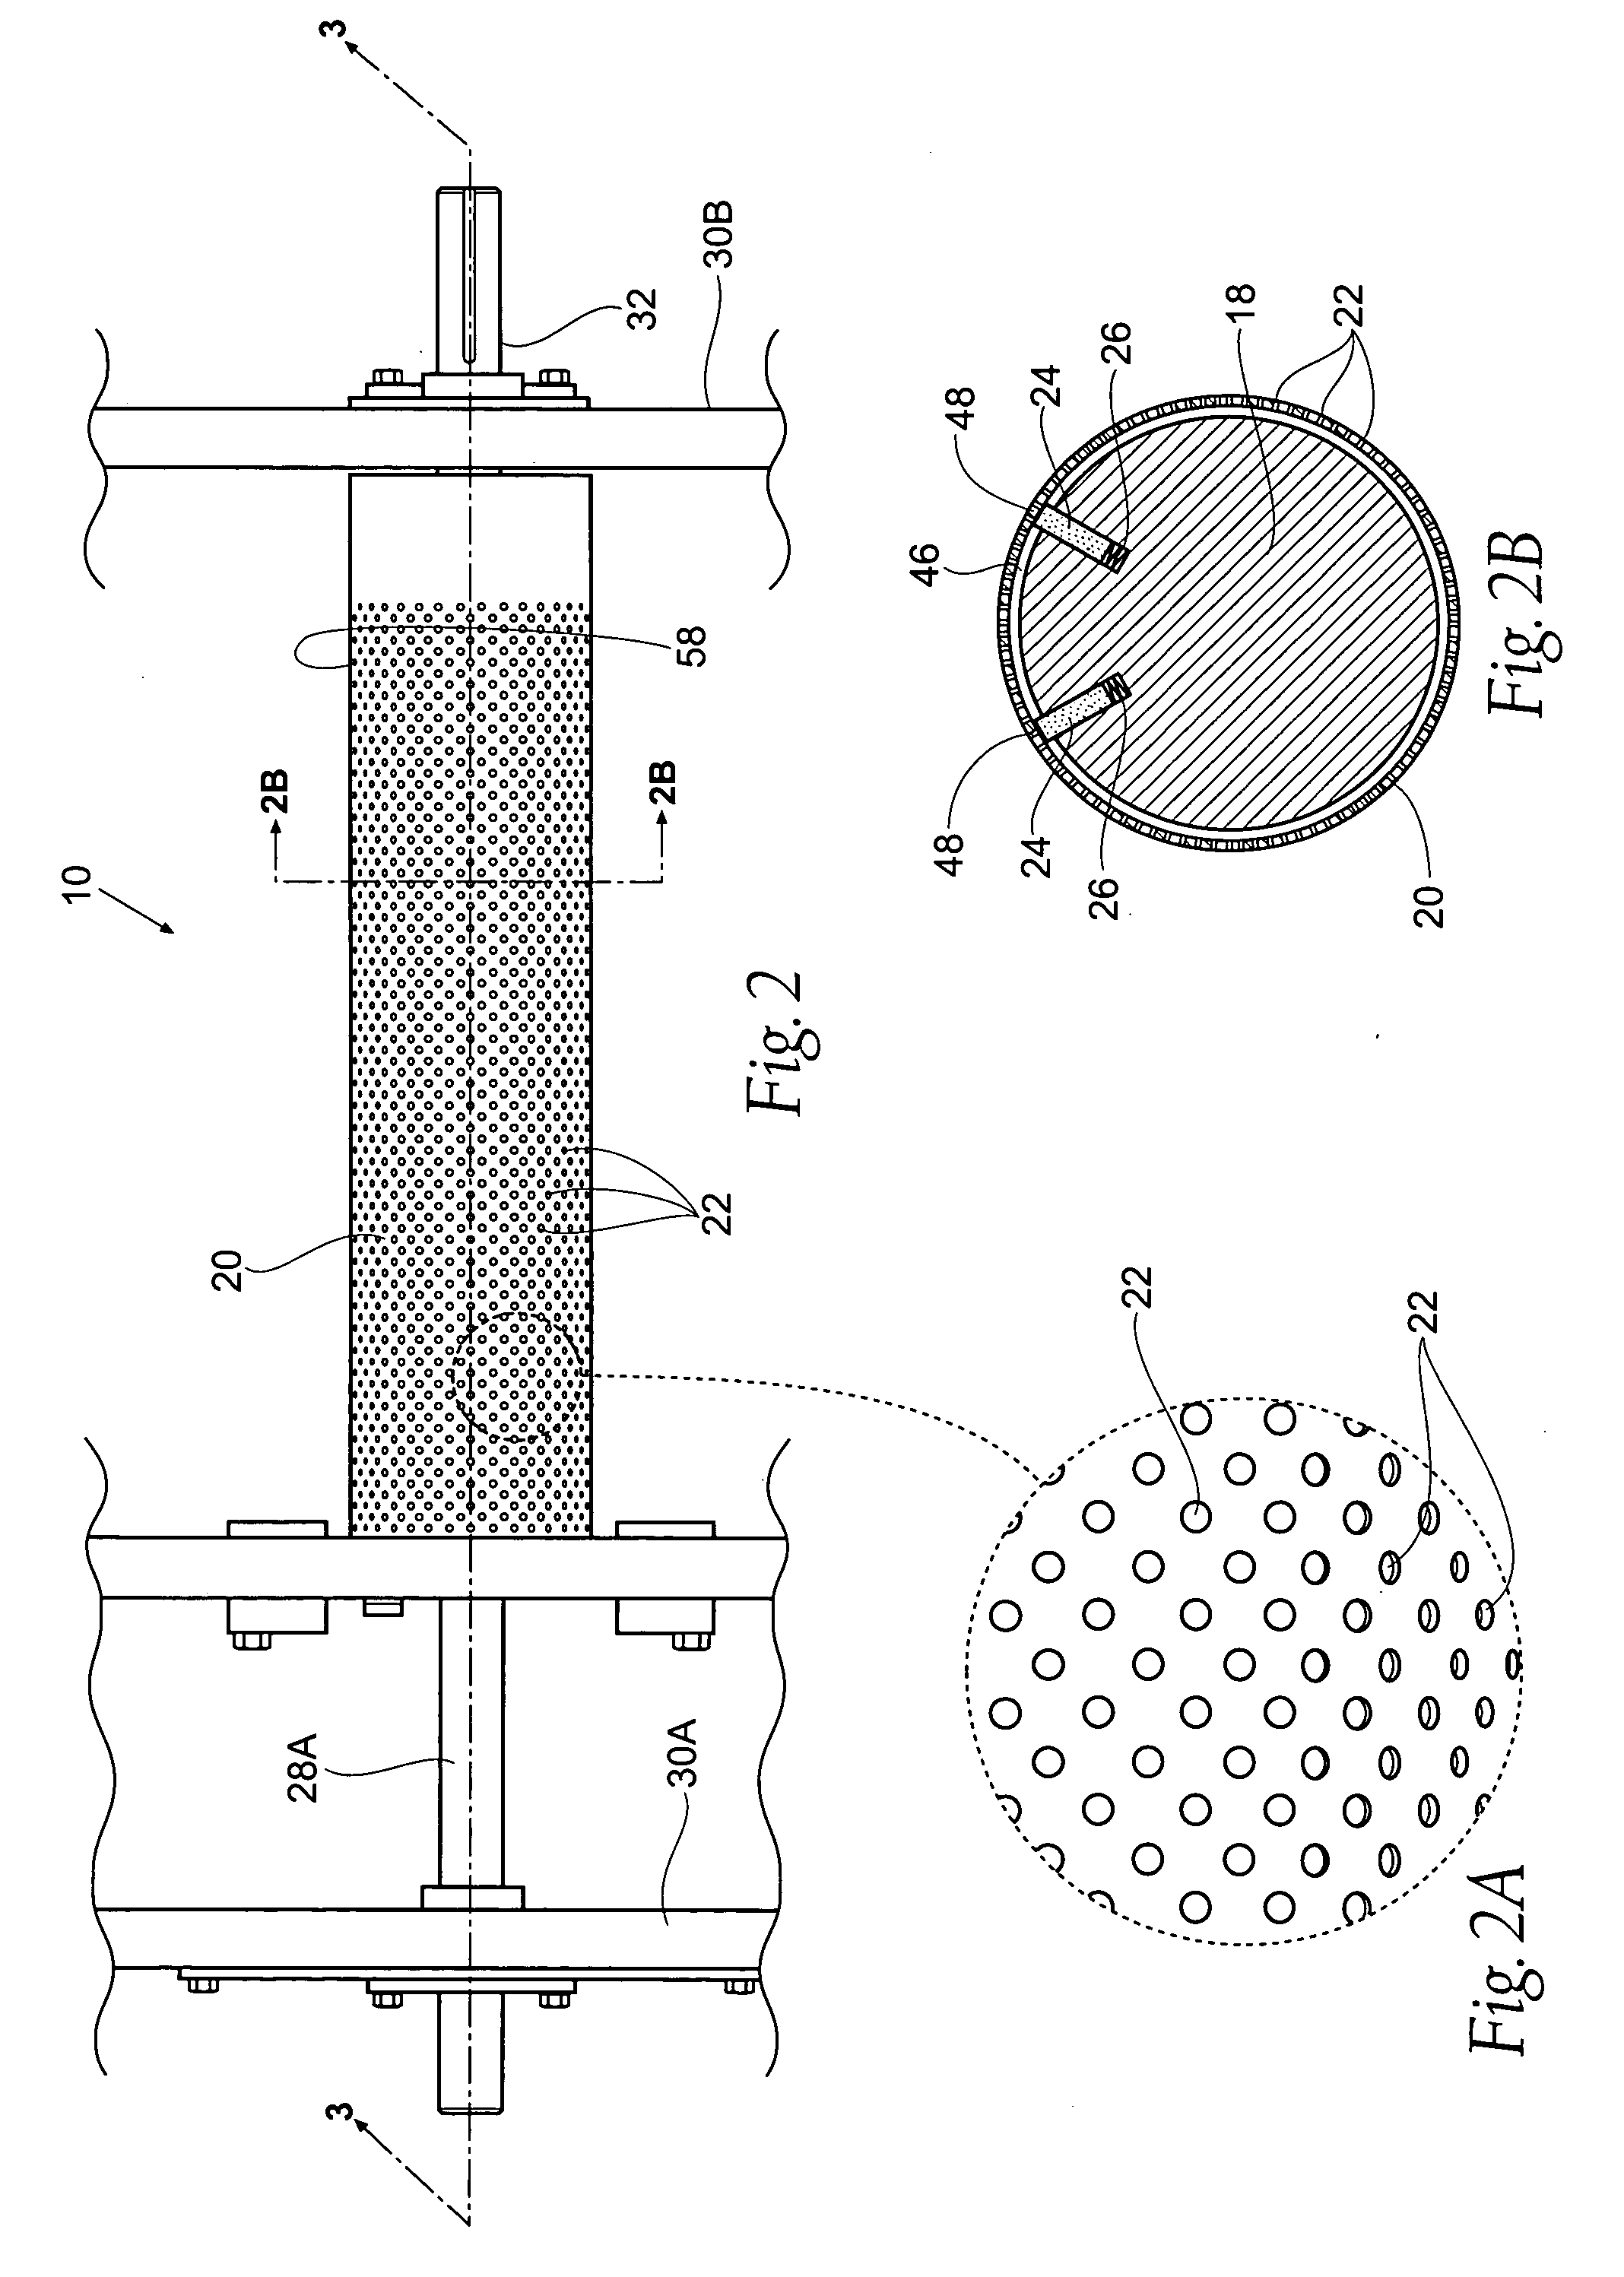 Method and apparatus for retaining individual sheet substrates in a curved configuration